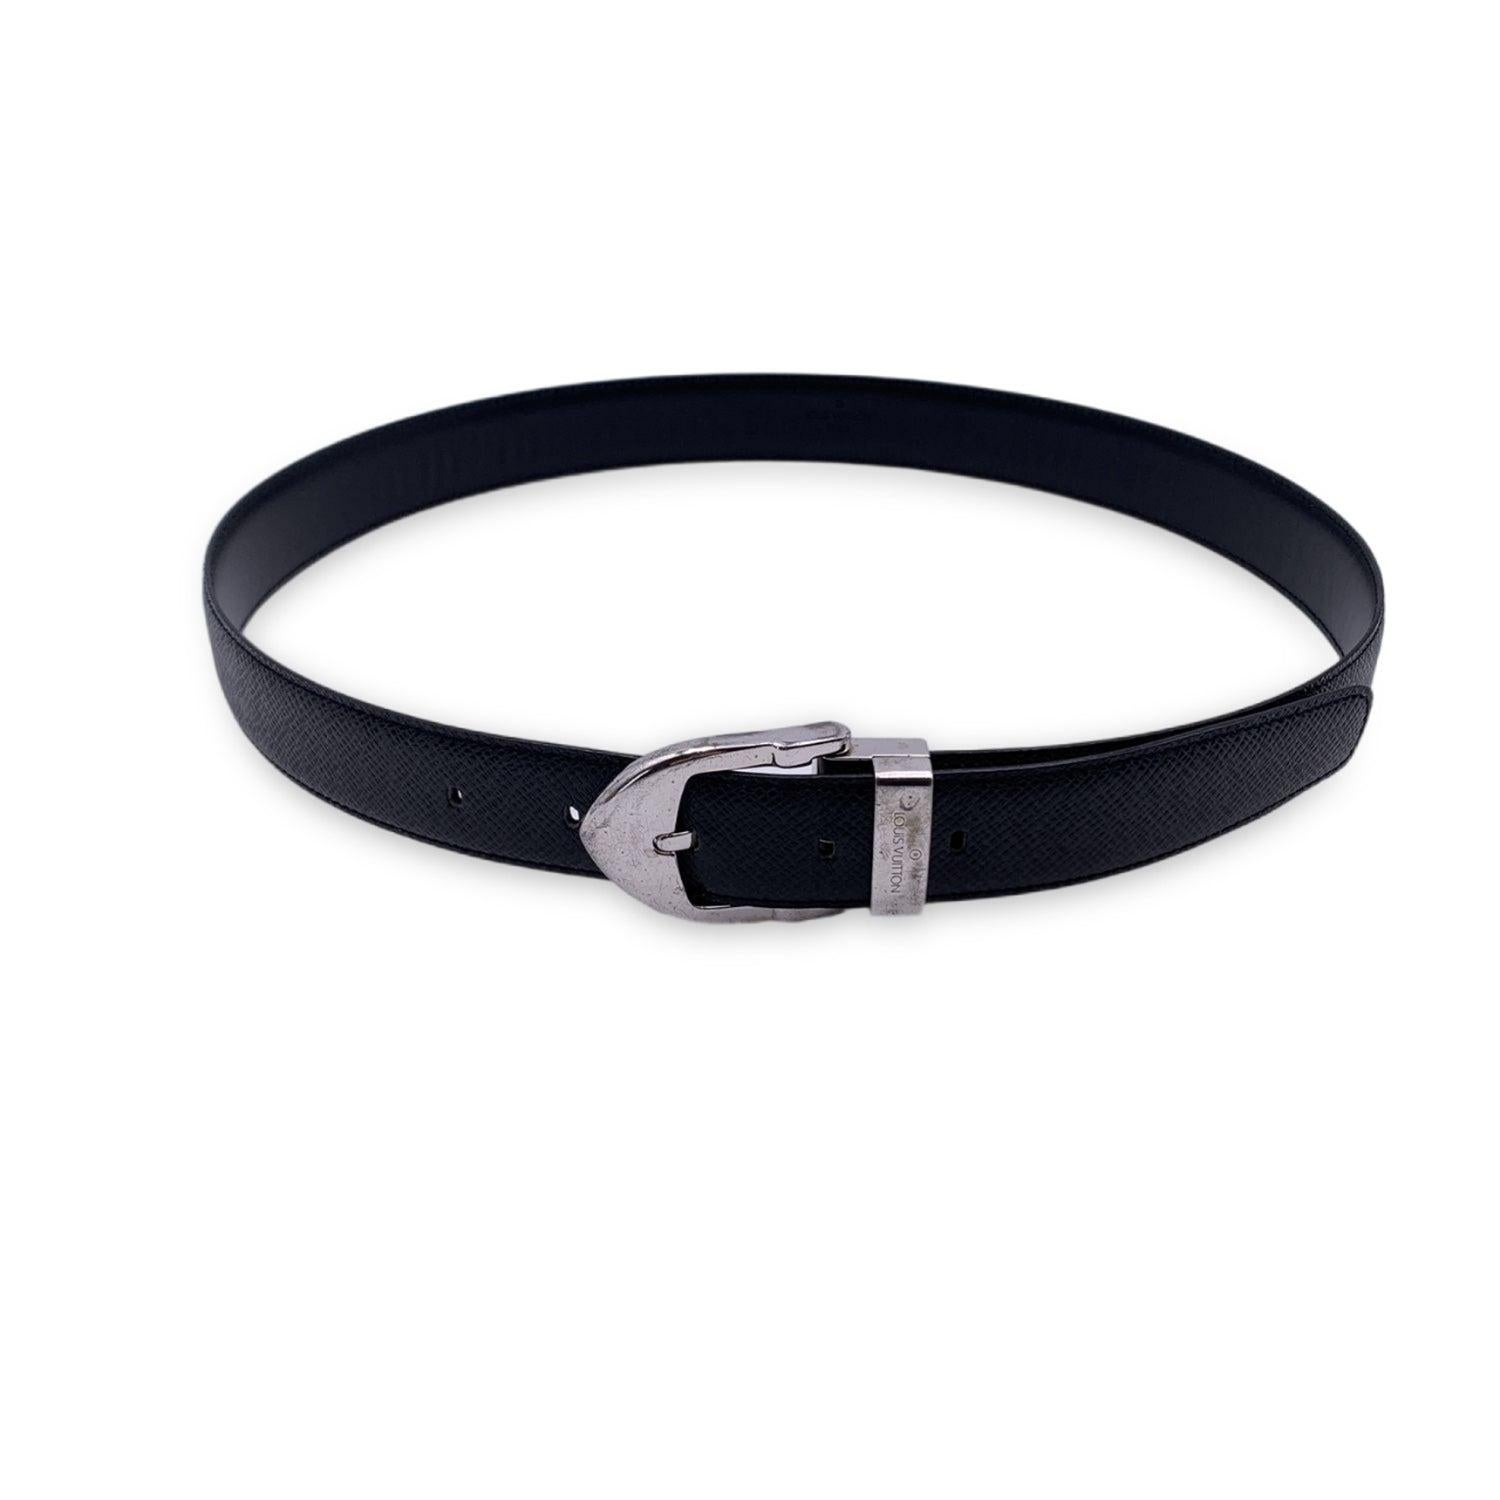 LOUIS VUITTON black taiga 'Ceinture Classic' leather belt. The belt features a silver metal buckle with engraved 'Louis Vuitton' signature. Five holes adjustment. Size 85/34. Width: 1.1 inches - 3 cm. Total length: 38 inches - 96.5 cm (only